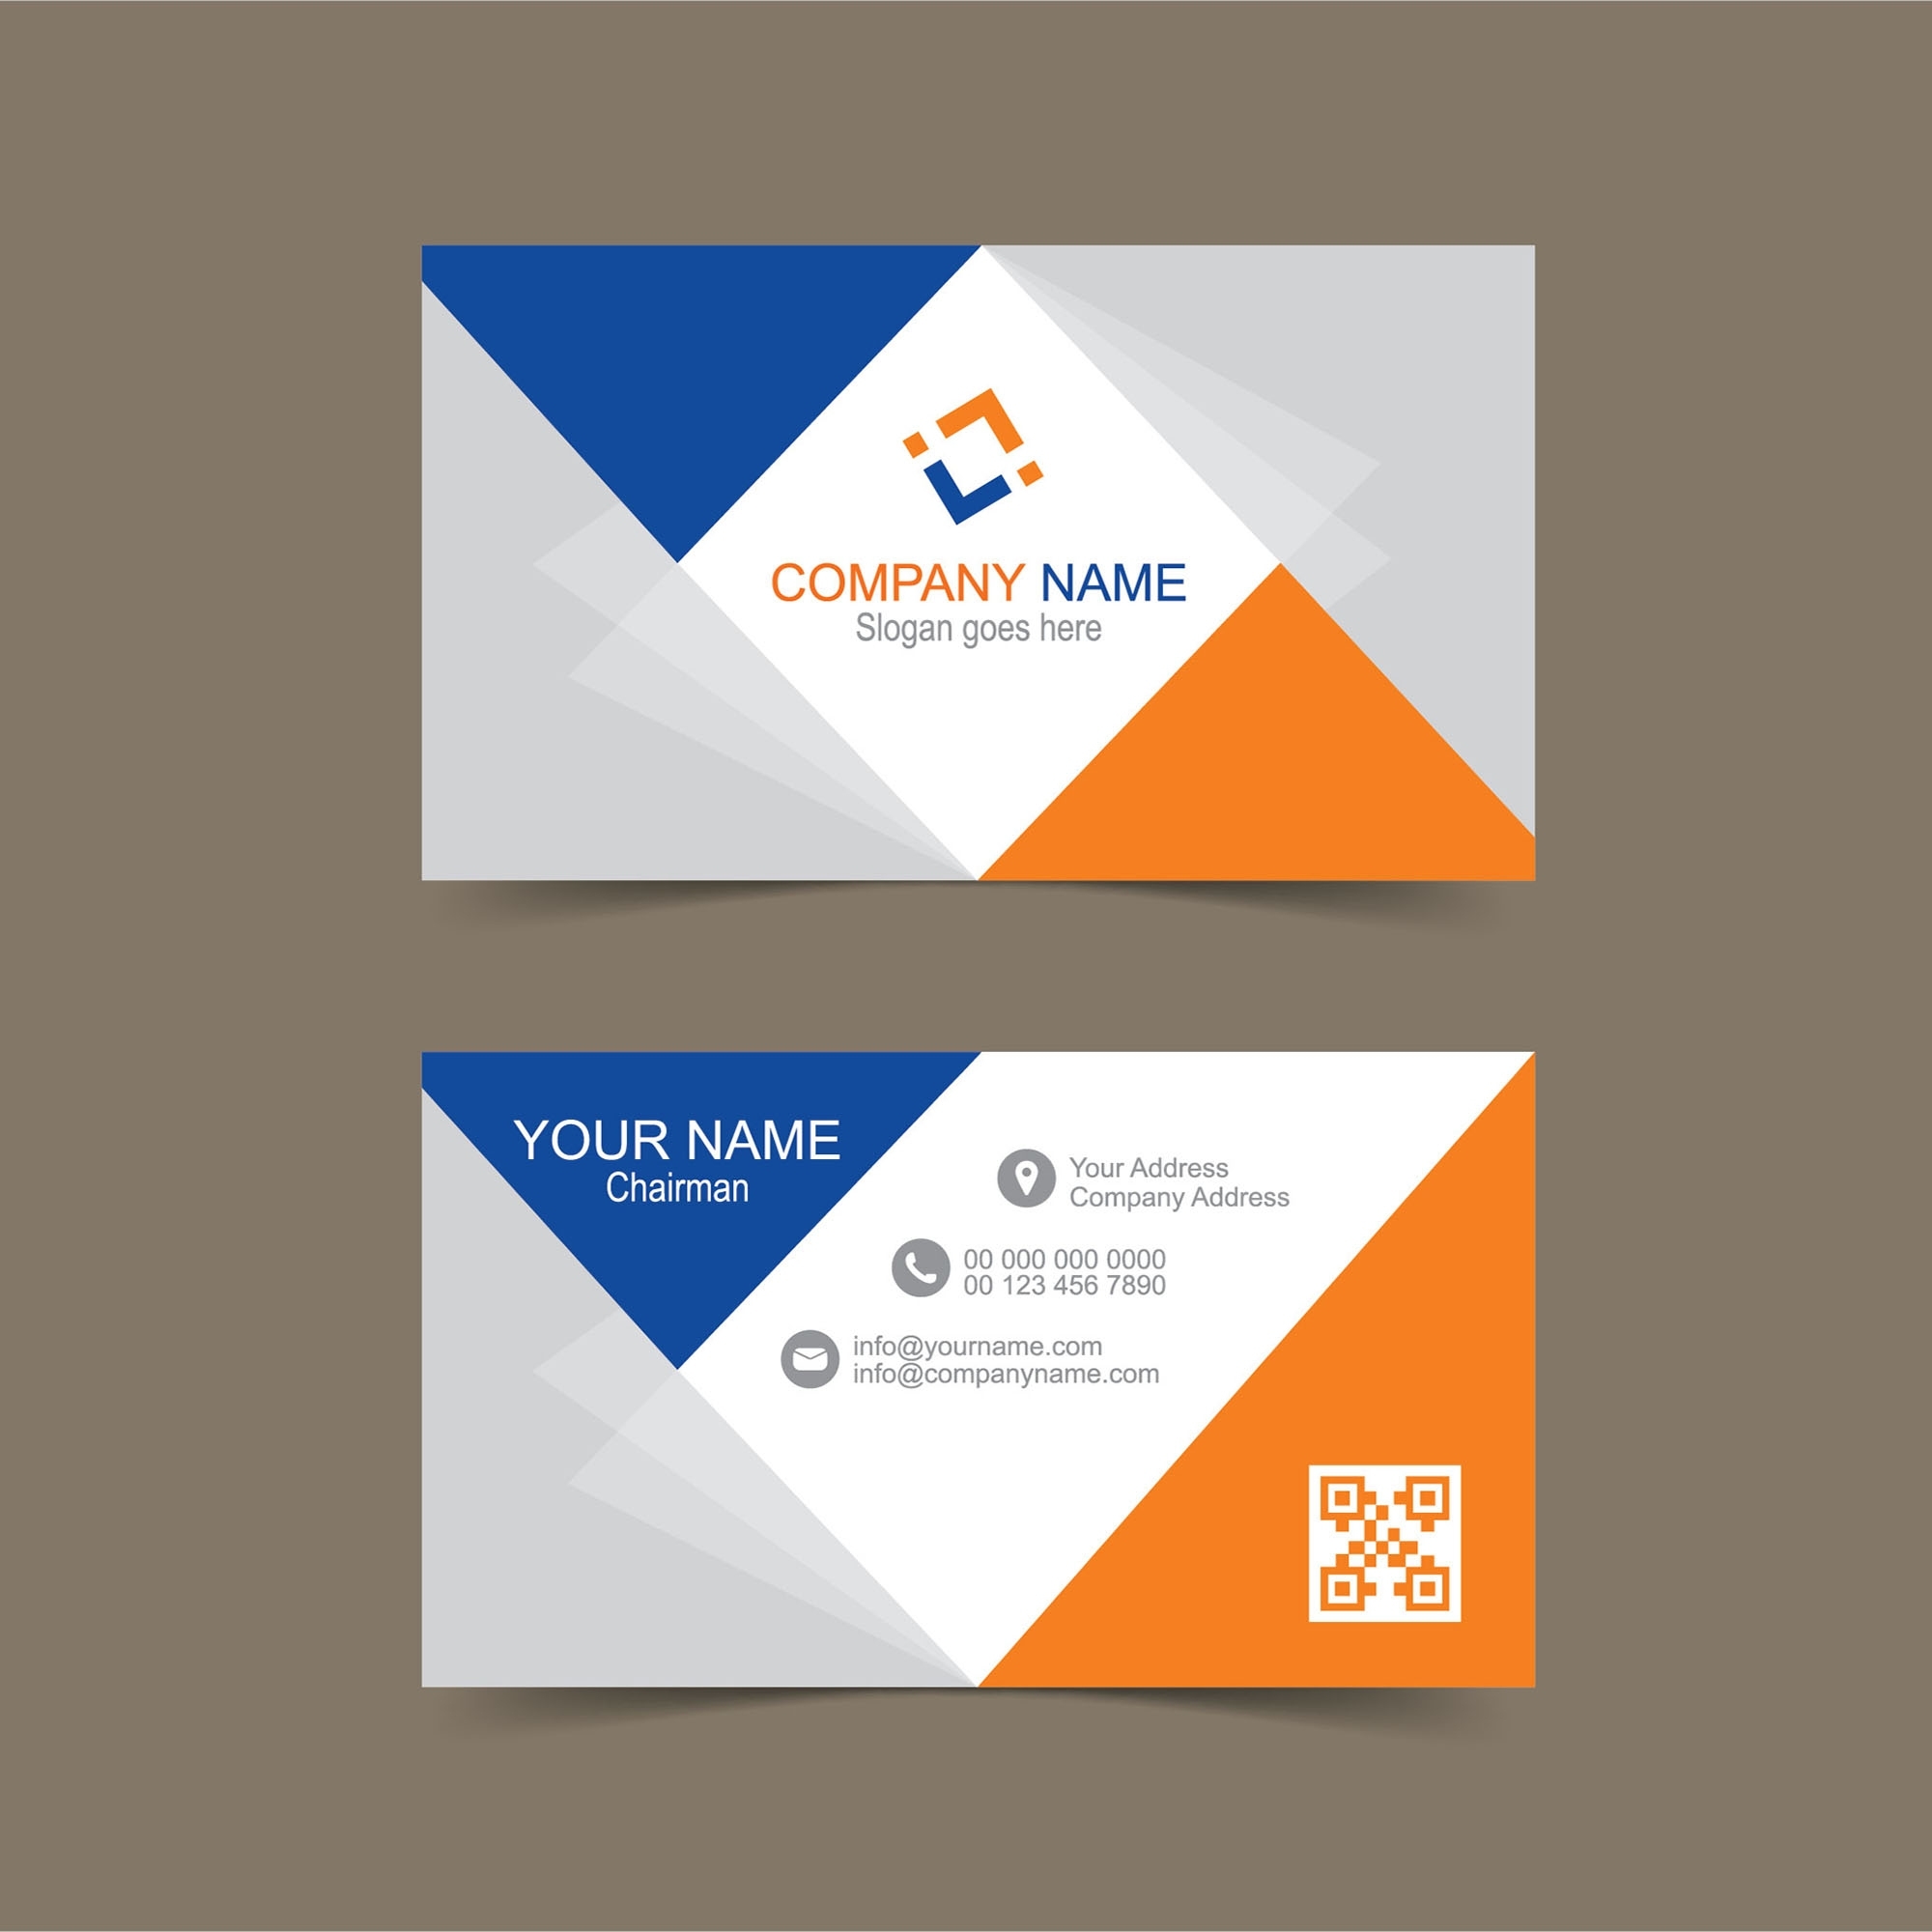 Free Business Card Template For Illustrator – Wisxi With Regard To Web Design Business Cards Templates